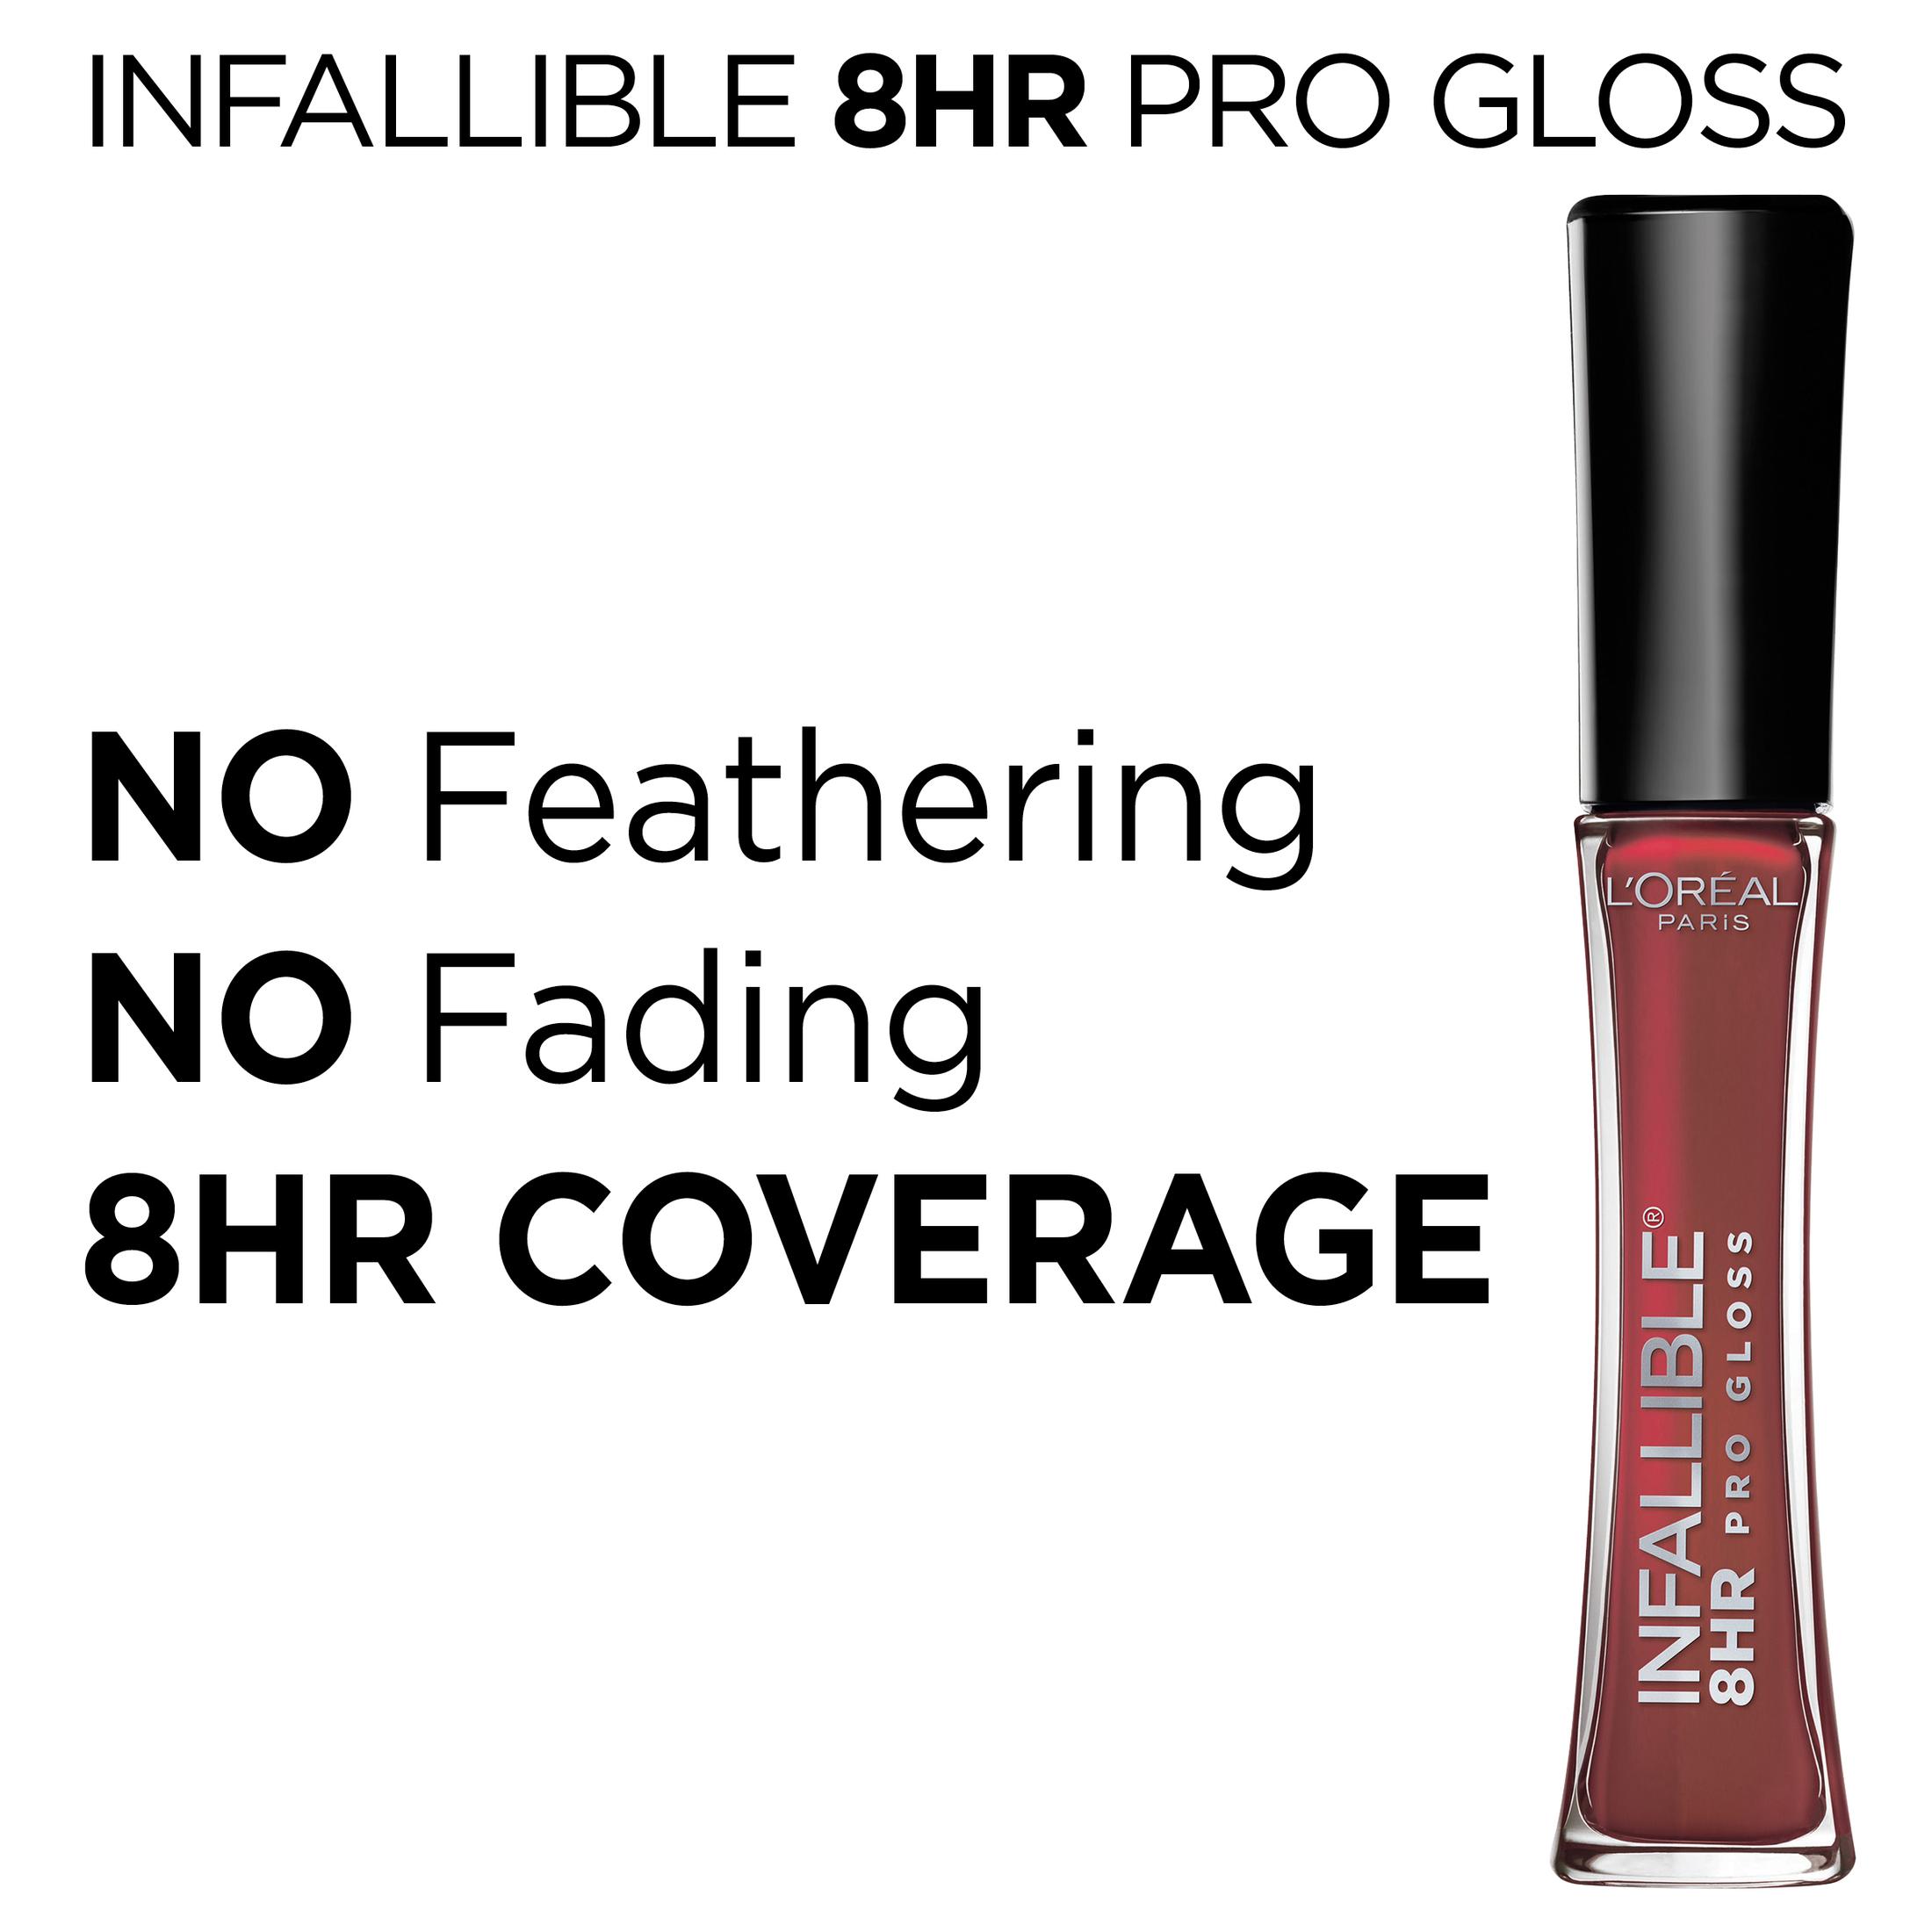 L'Oreal Paris Infallible 8 Hour Pro Hydrating Lip Gloss, Sangria - image 3 of 5